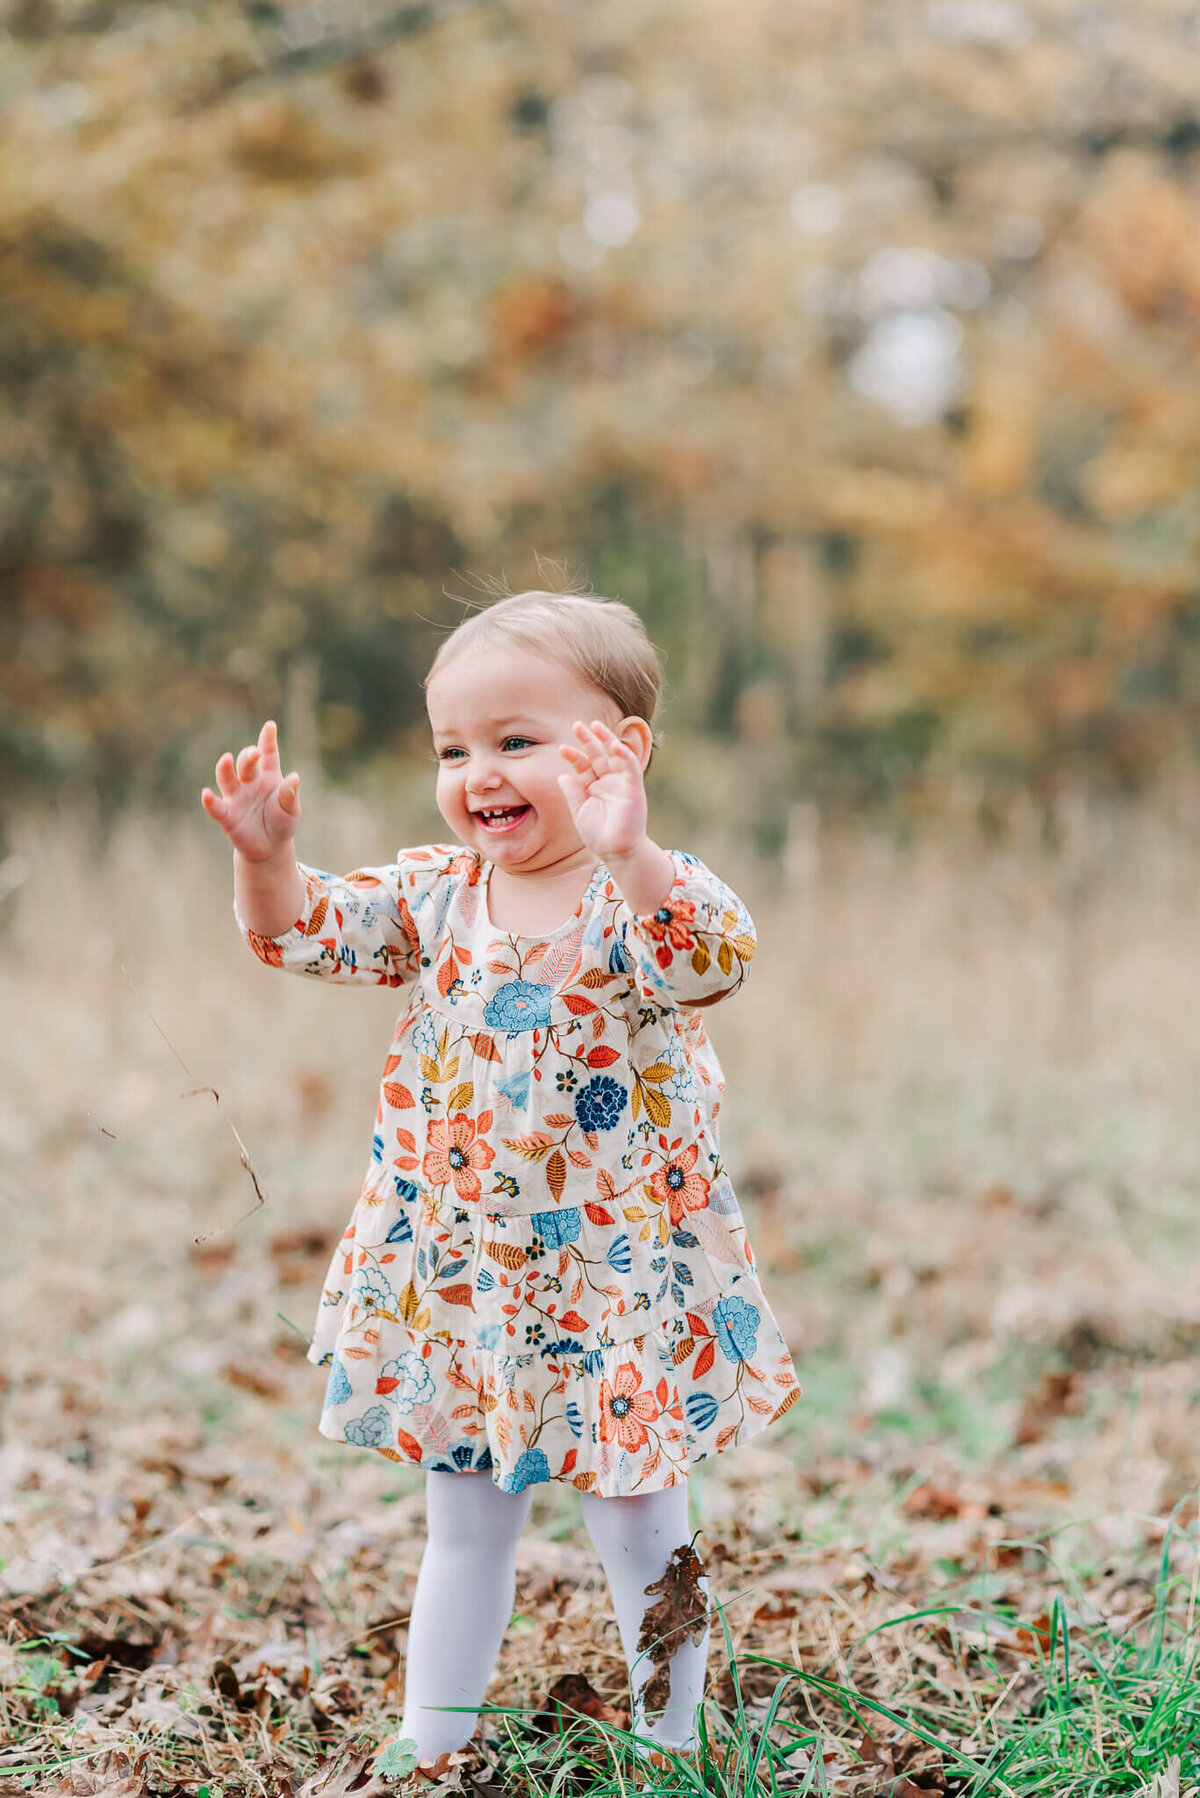 A happy, laughing  toddler wearing a floral dress holding up her hands